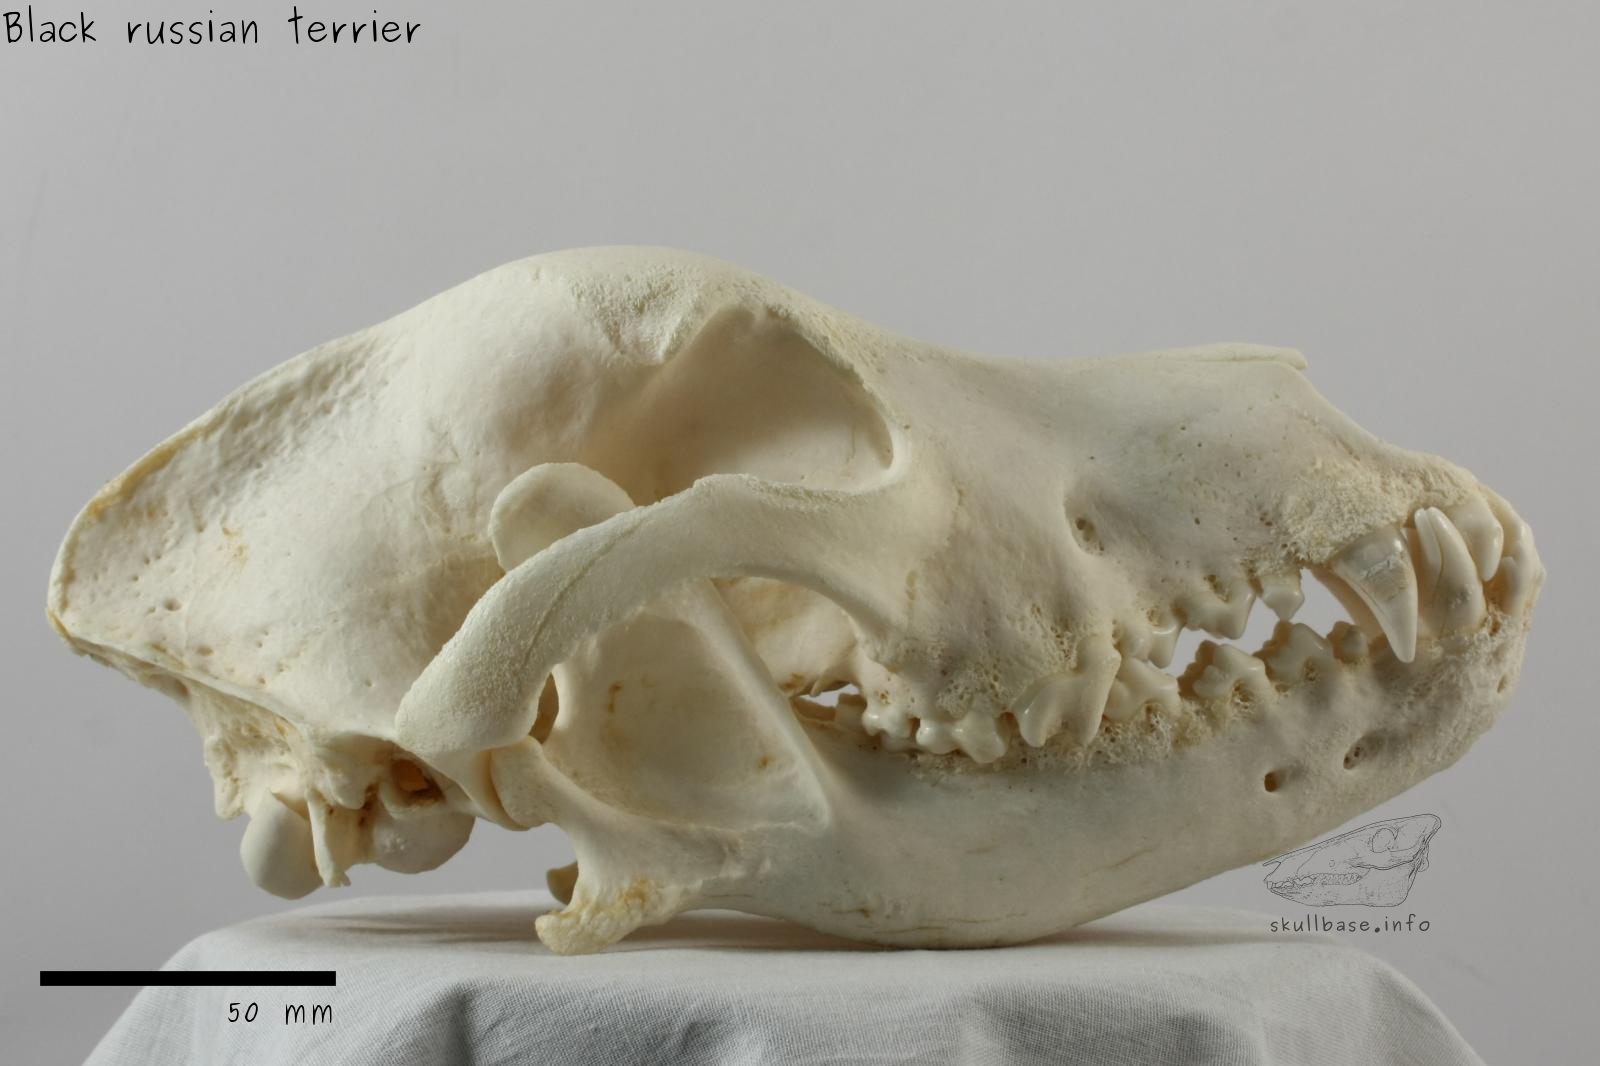 Black russian terrier (Canis lupus familiaris) skull lateral view